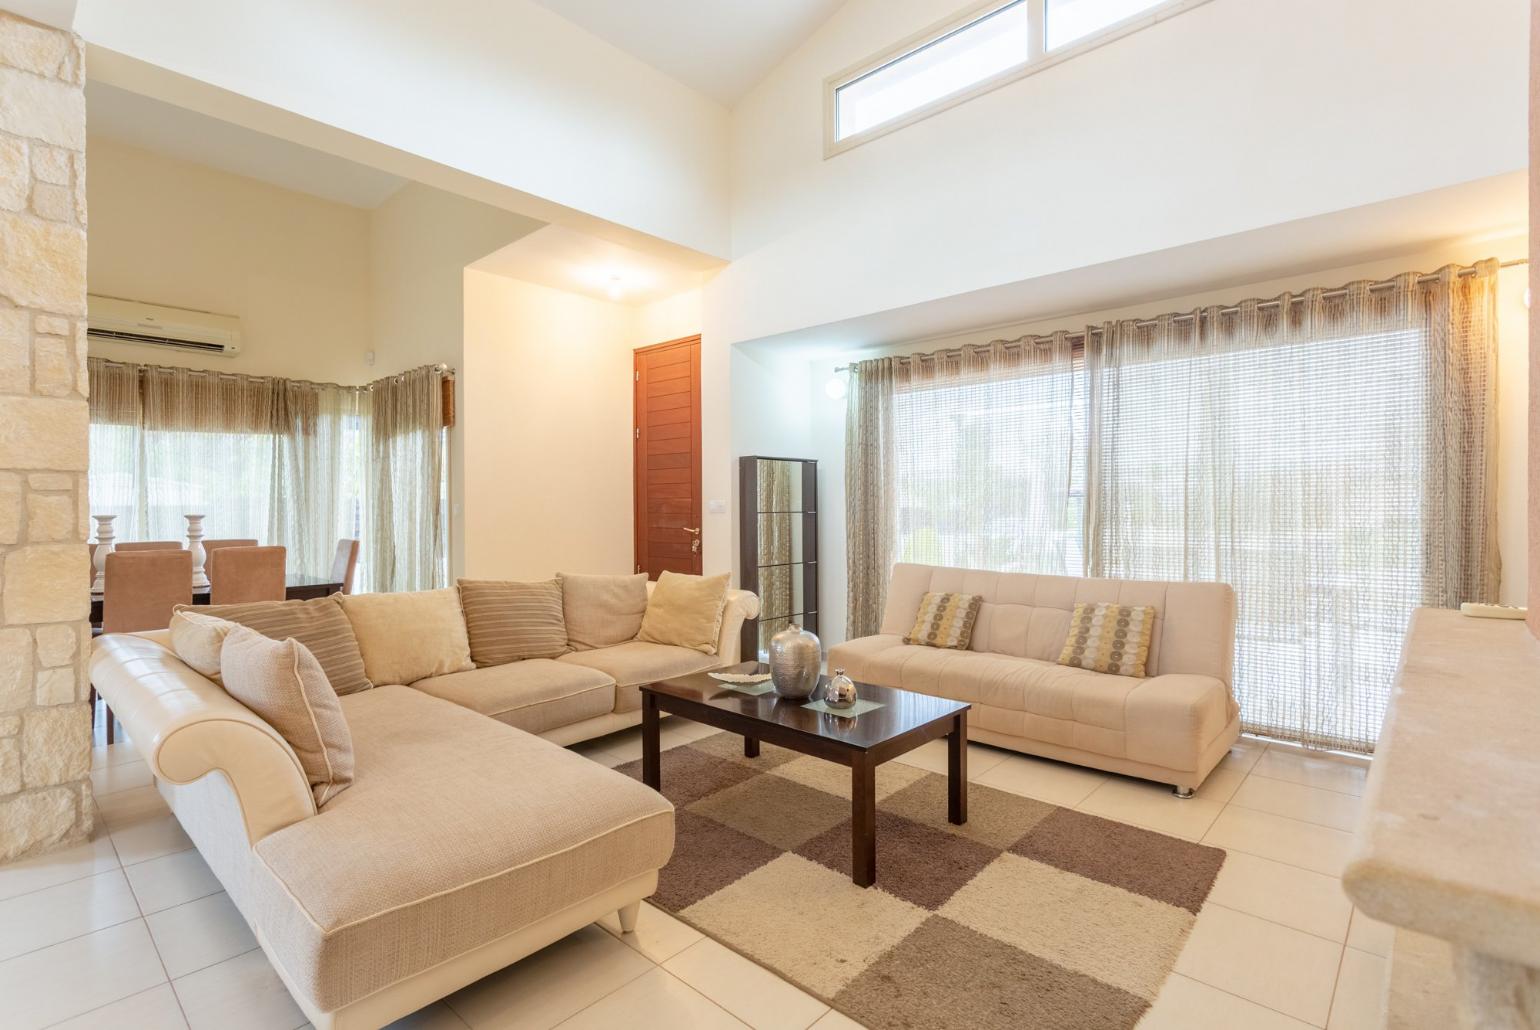 Open-plan living room with sofas, dining area, kitchen, ornamental fireplace, A/C, WiFi internet, satellite TV, DVD player, and terrace access